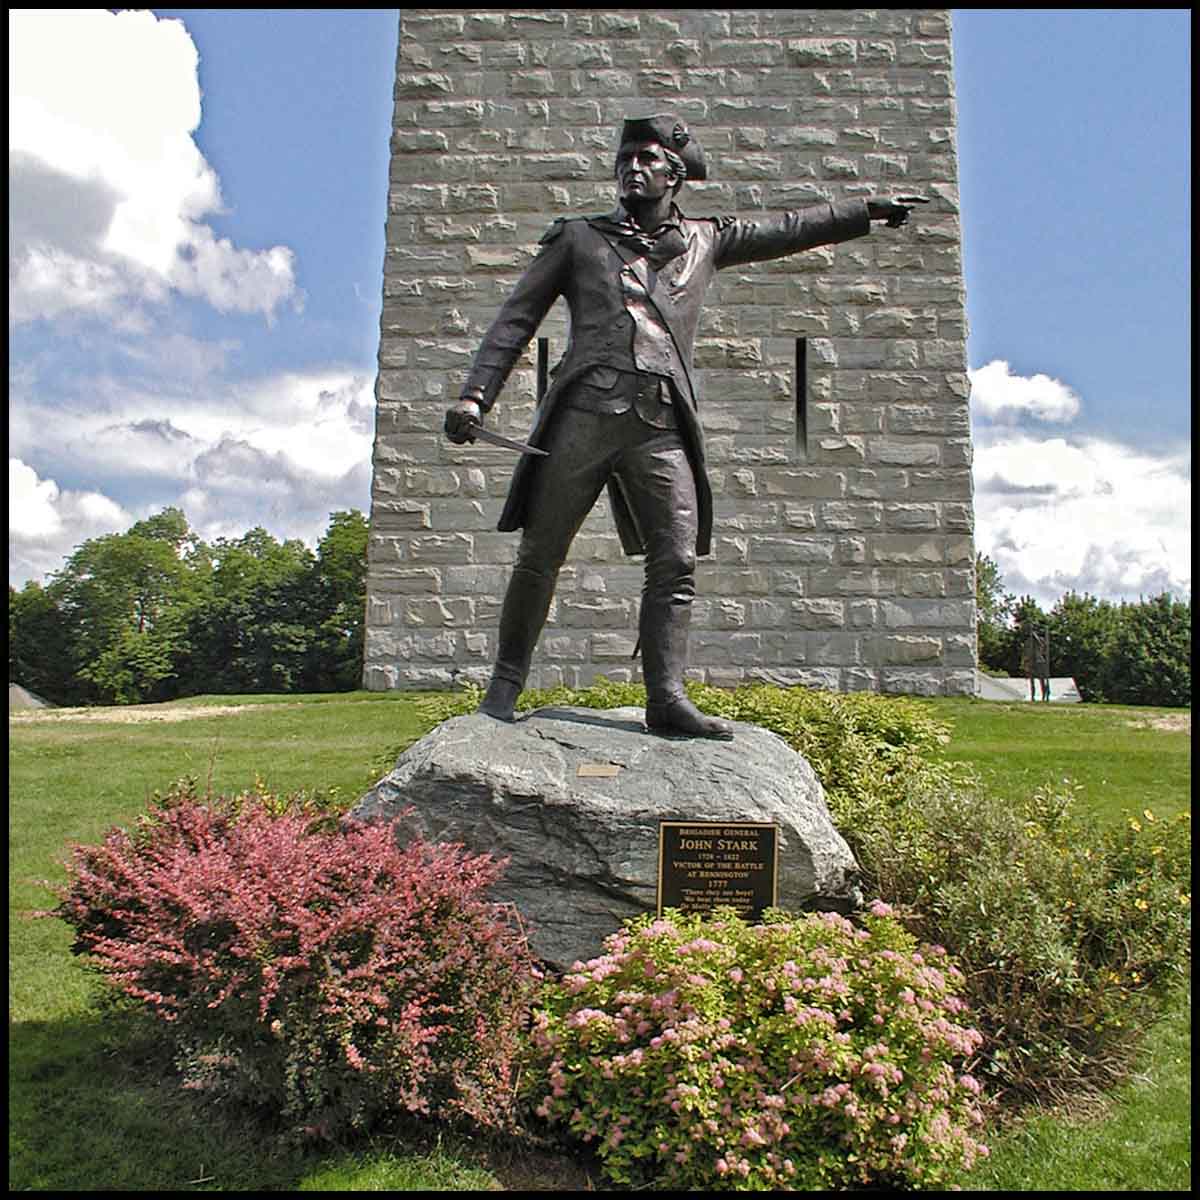 exterior photo of bronze sculpture of John Stark pointing with outstretched arm and standing on rock surrounded by shrubs in front of a obelisk-type monument